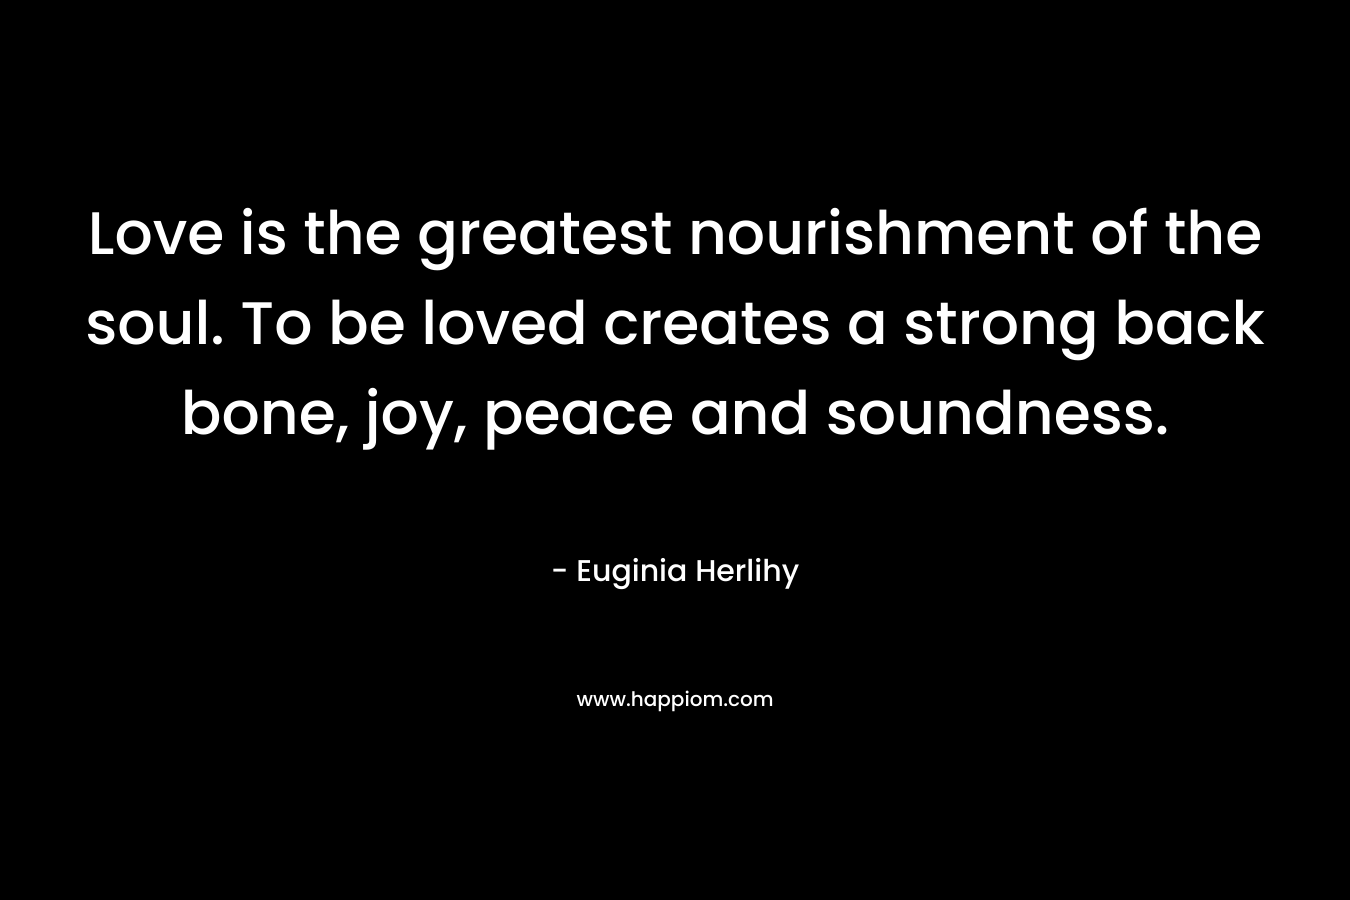 Love is the greatest nourishment of the soul. To be loved creates a strong back bone, joy, peace and soundness. – Euginia Herlihy